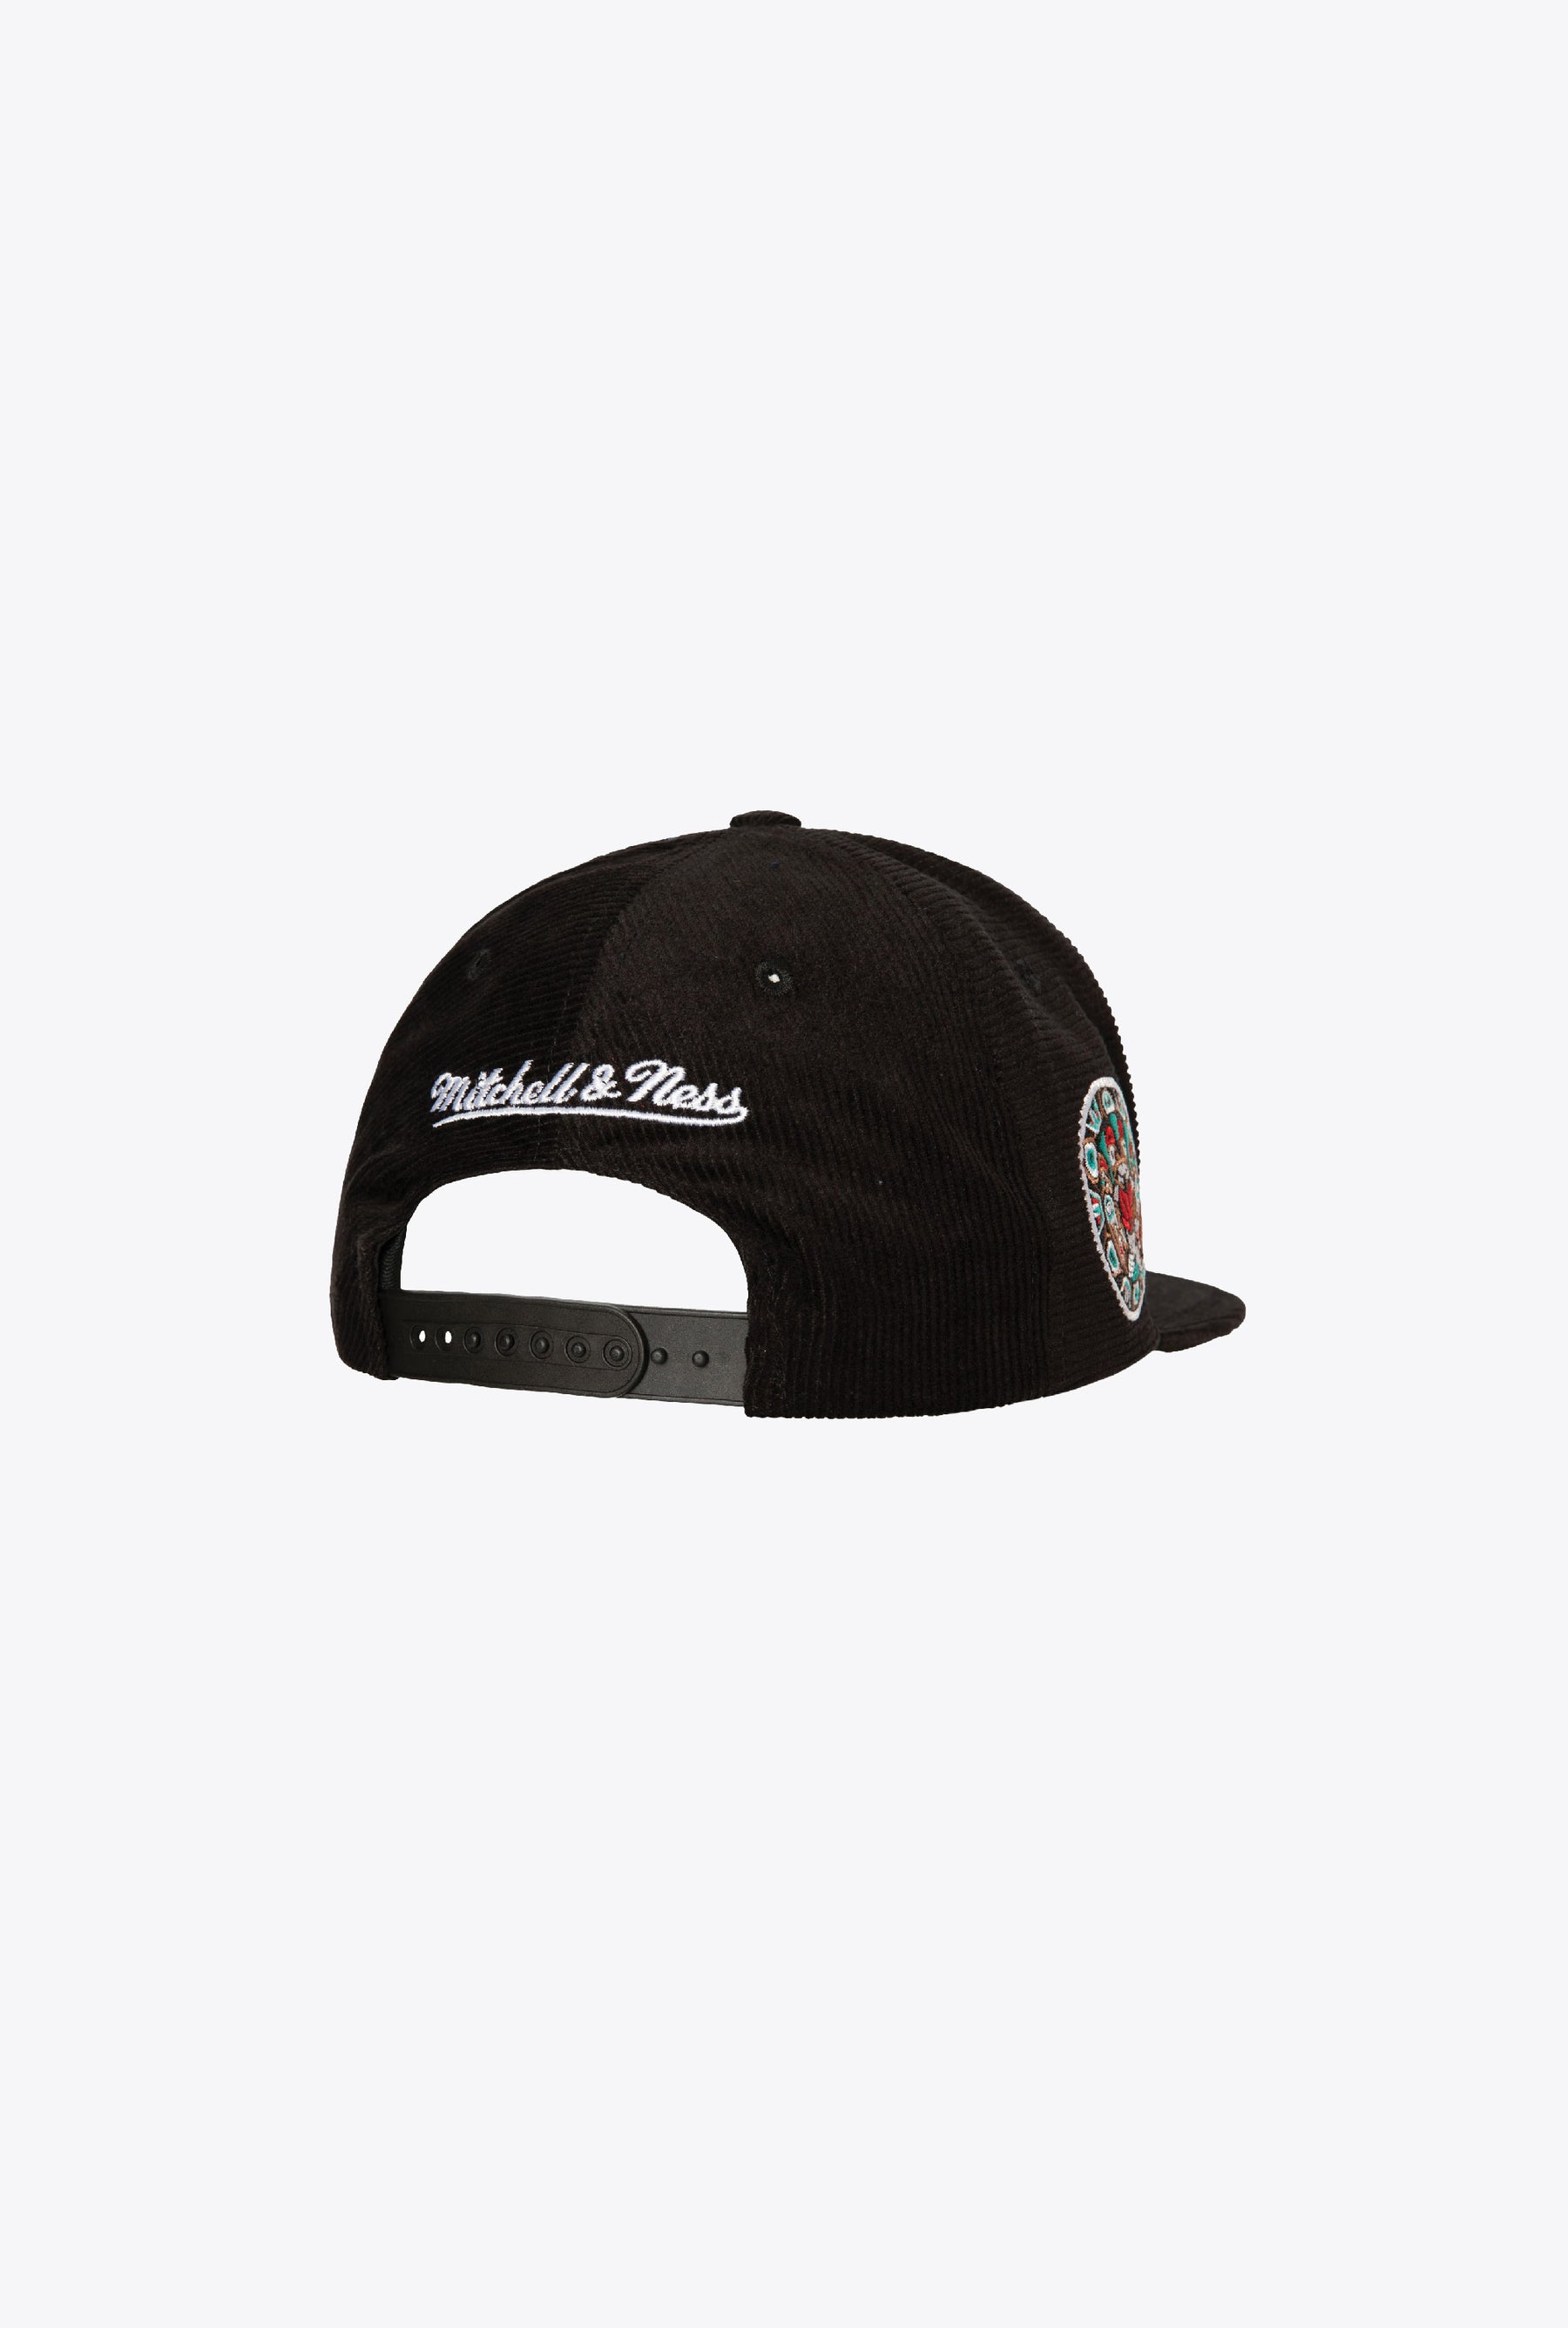 Vancouver Grizzlies All Directions Snapback HWC